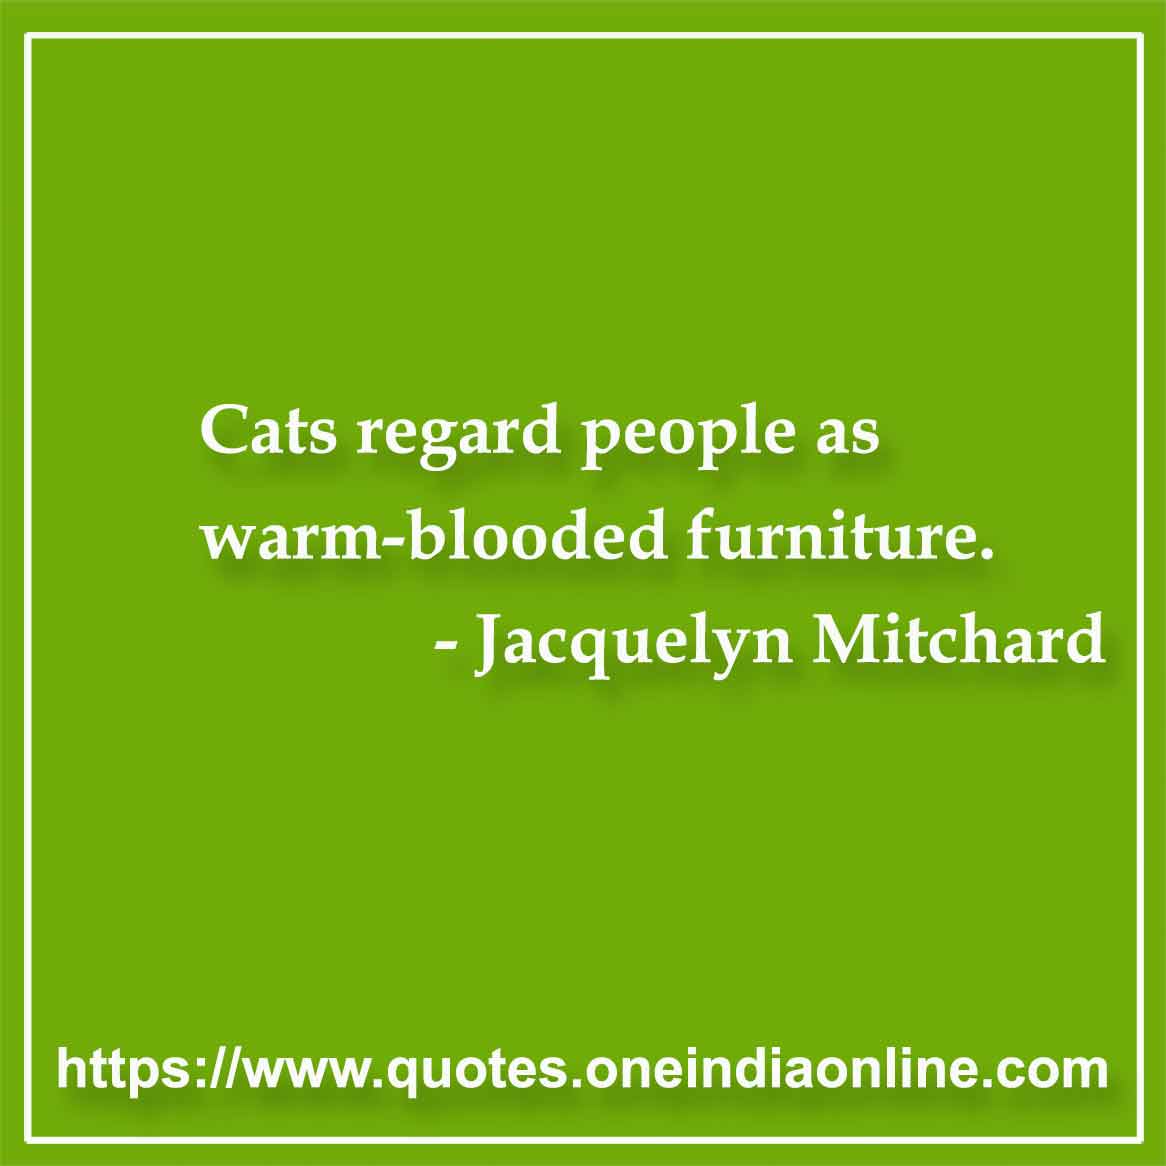 Cats regard people as warm-blooded furniture.

- Cat Quotes by Jacquelyn Mitchard